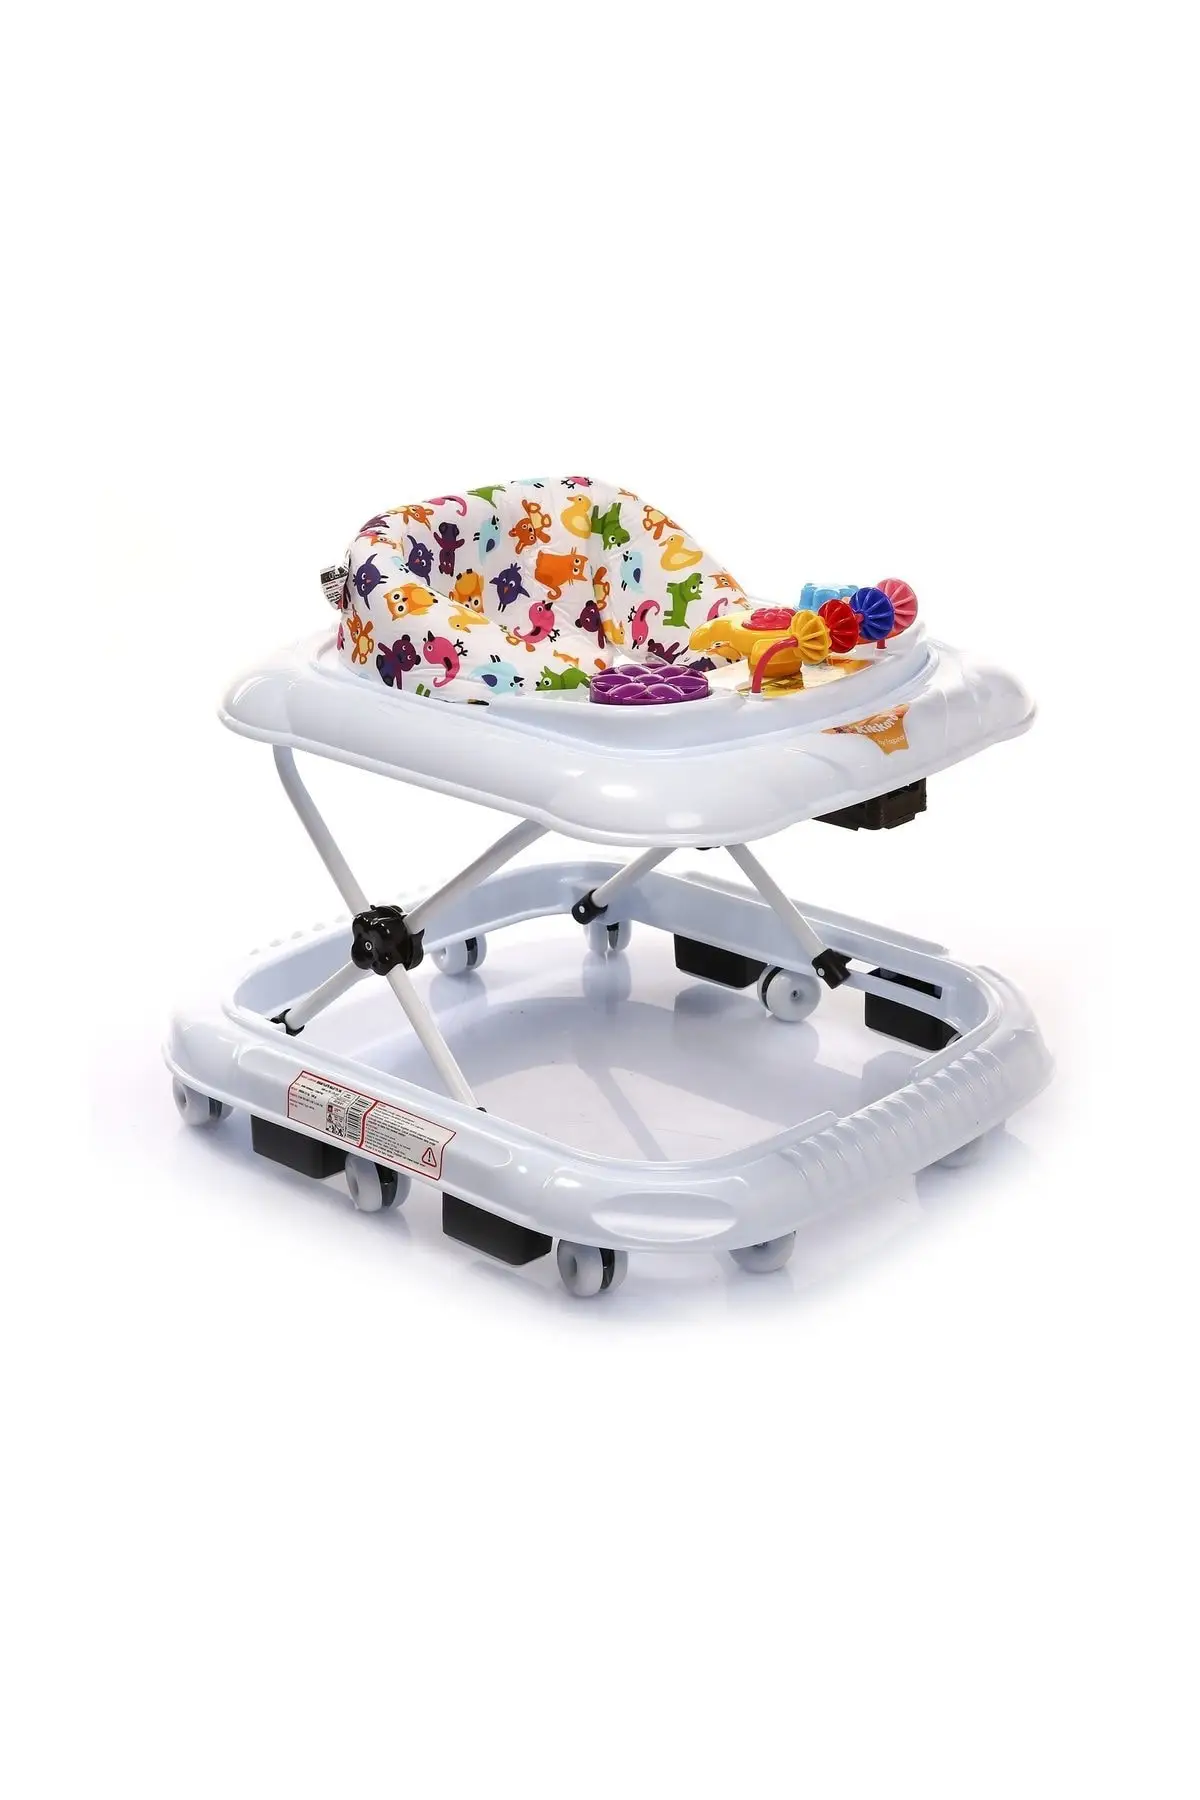 Wheel Baby Walking Supports White Mom Baby Products Bebe Girl Boy Child Accessories Family Care Free Shipping